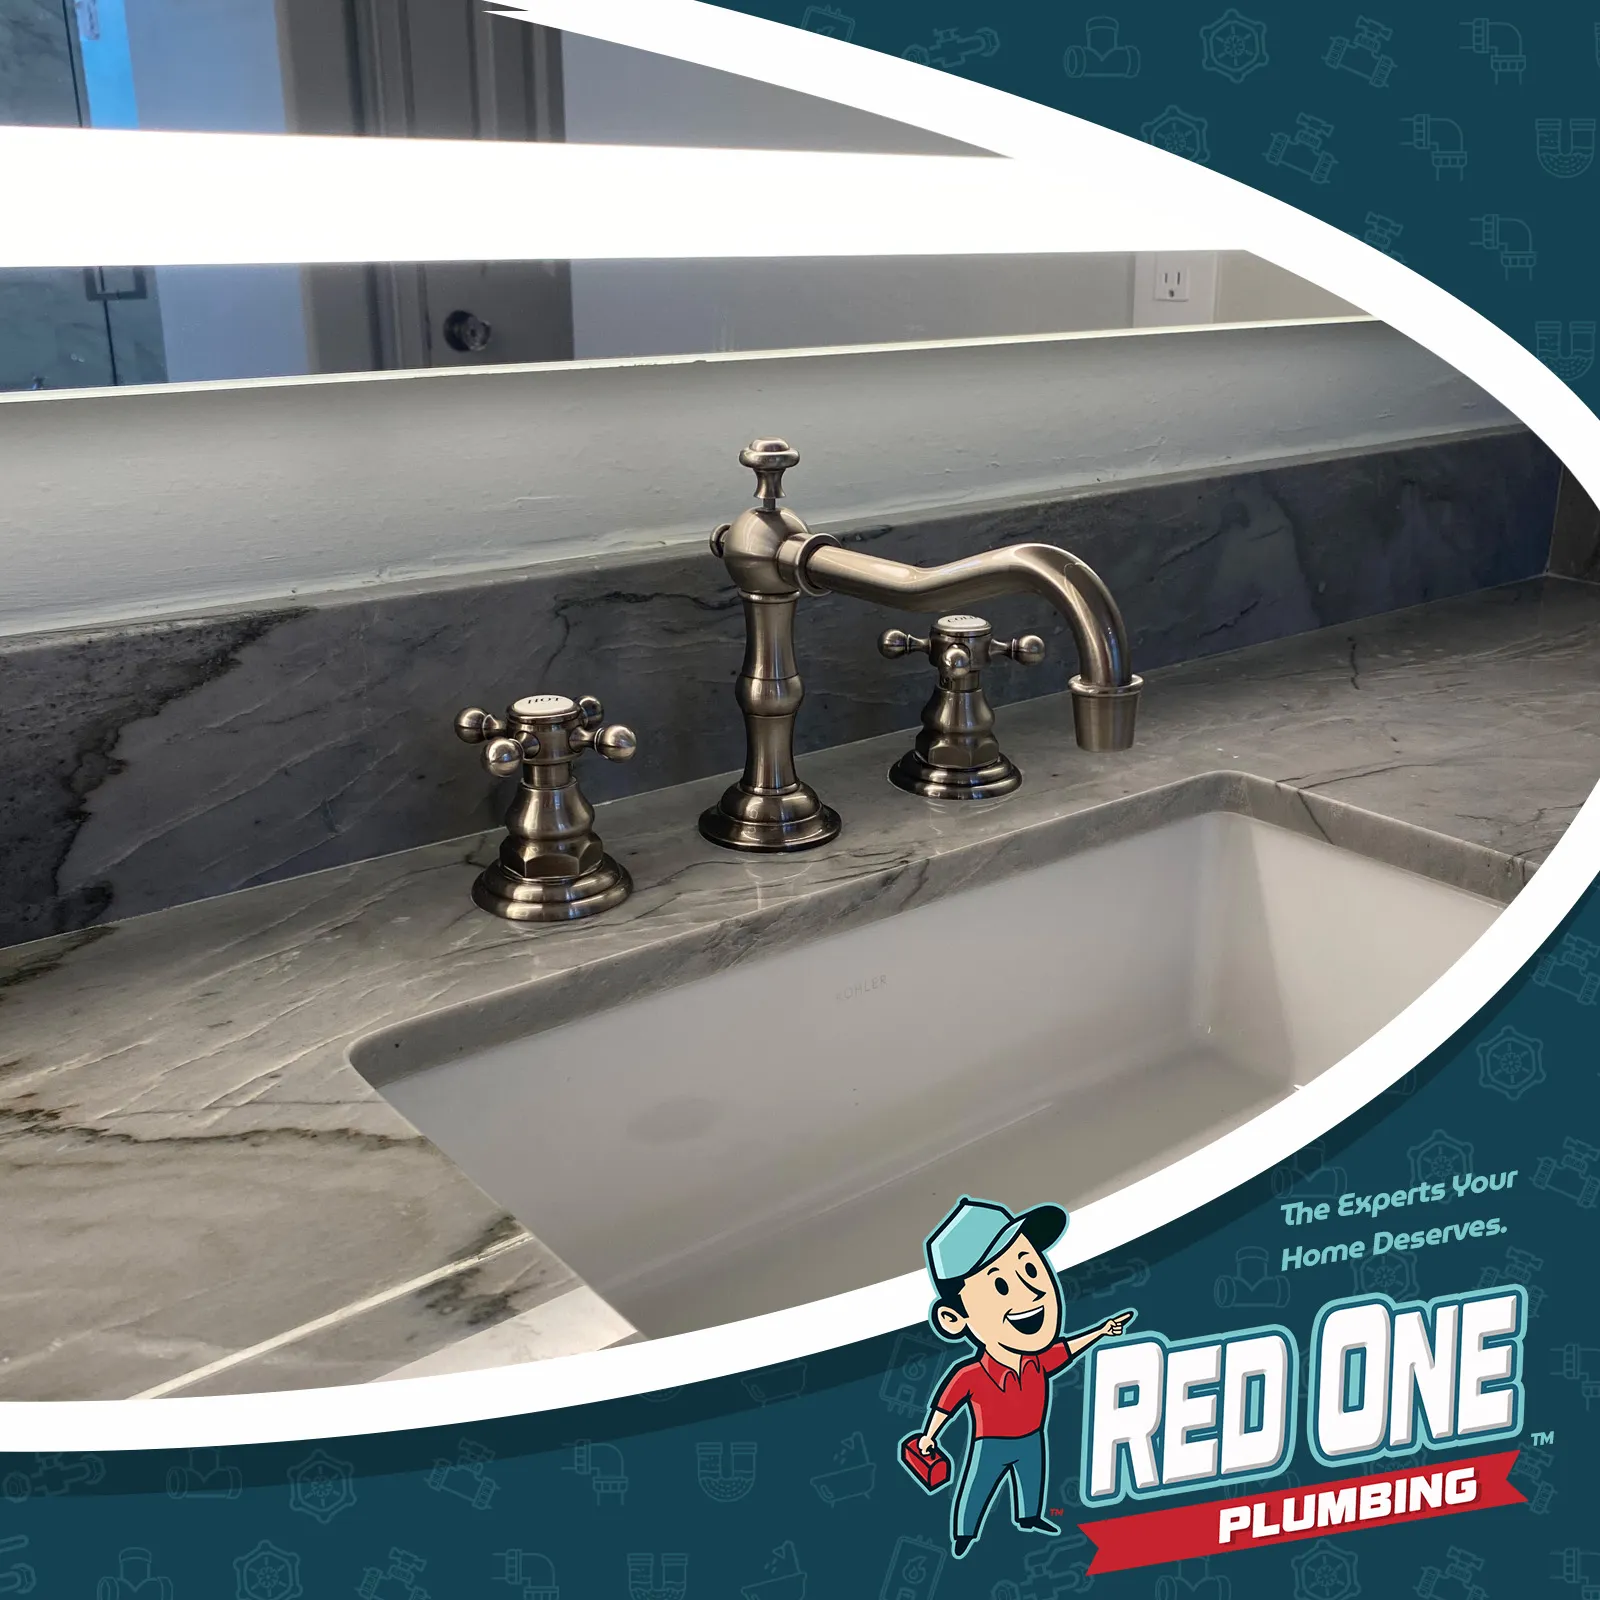 Silver vanity faucet installed by Red One Plumbing